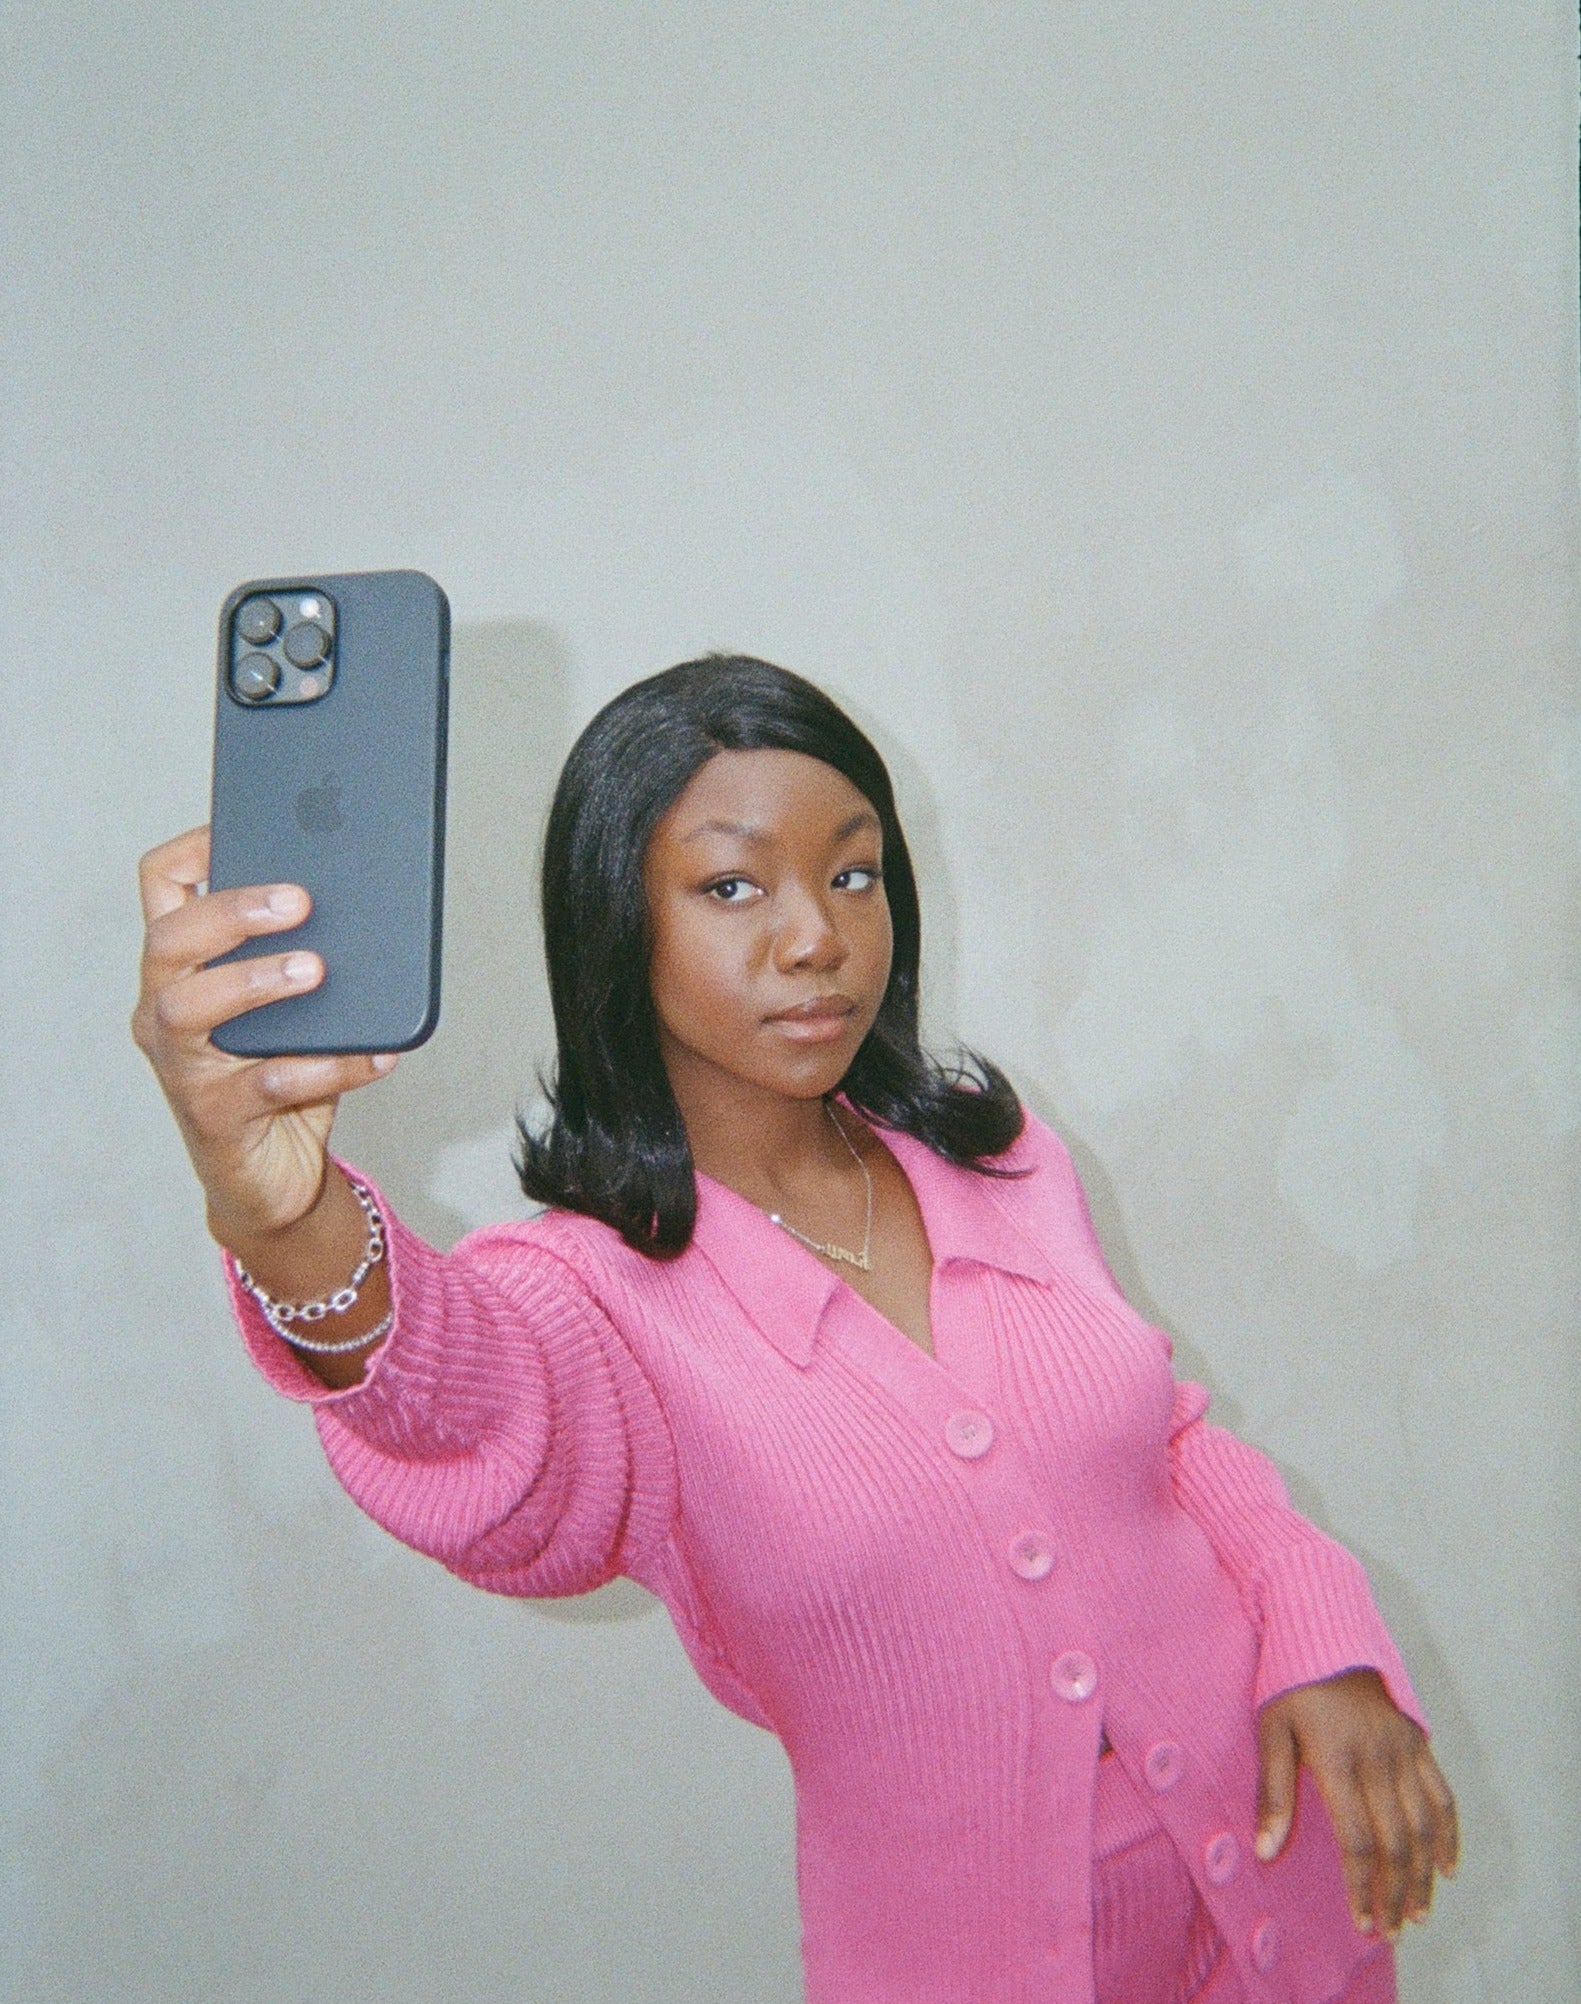 A stylish woman wearing a pink outfit poses for a selfie, her black synthetic hair wig with flipped ends completing her trendy outfit.